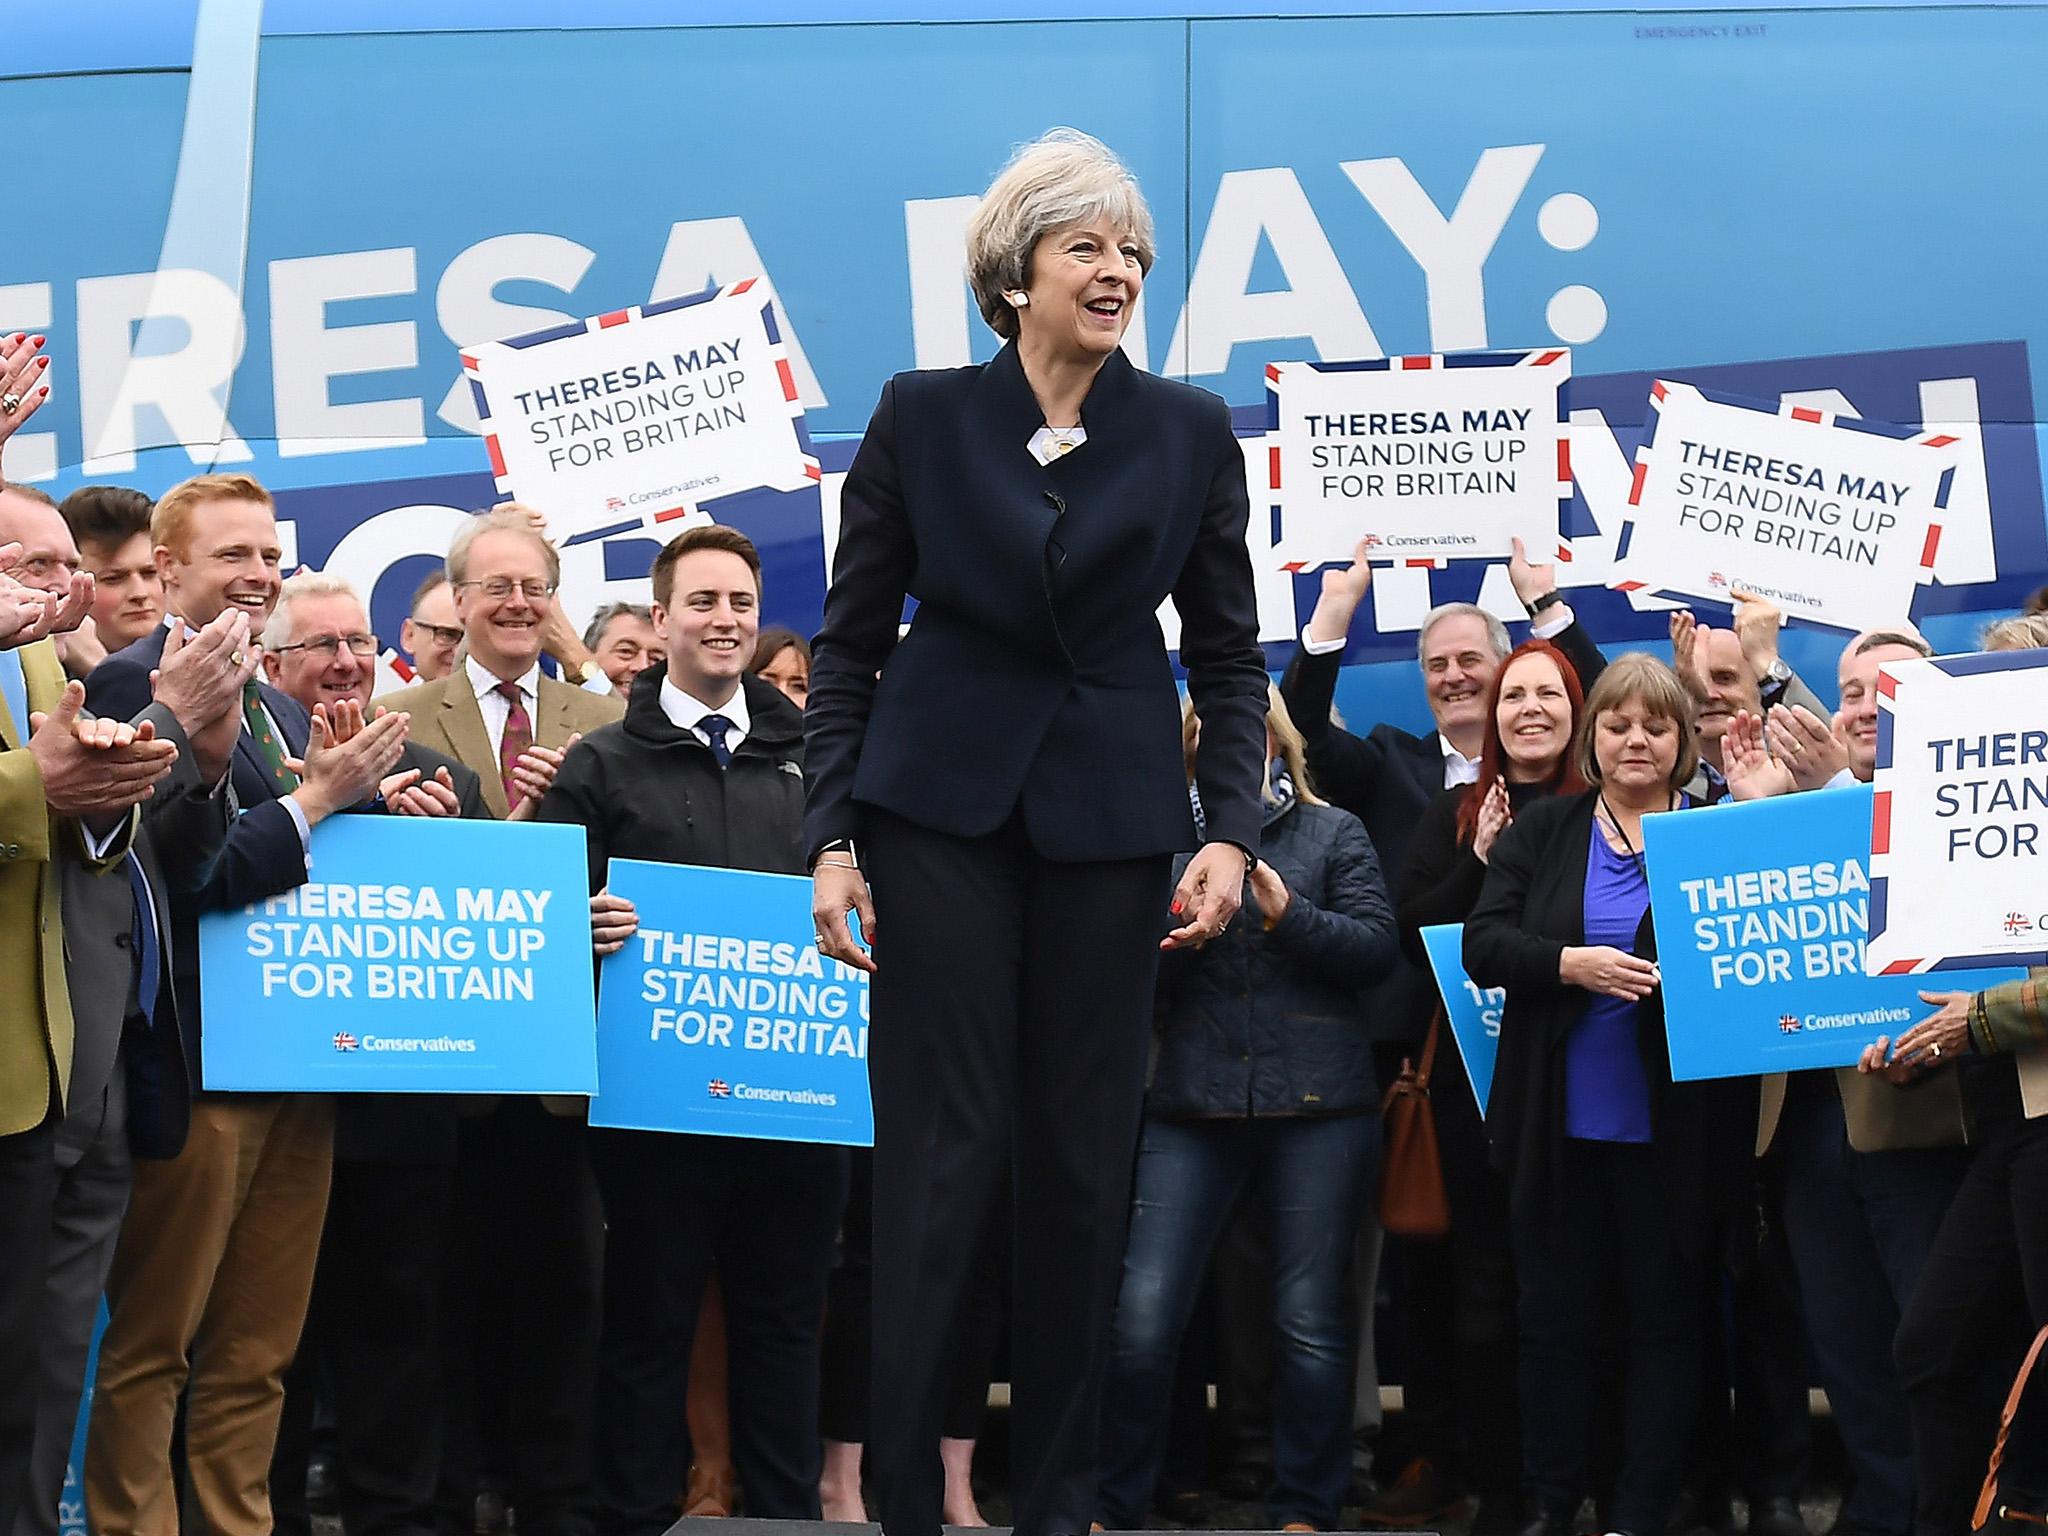 Theresa May speaks to party supporters in front of the Conservative Party's general election campaign battle bus